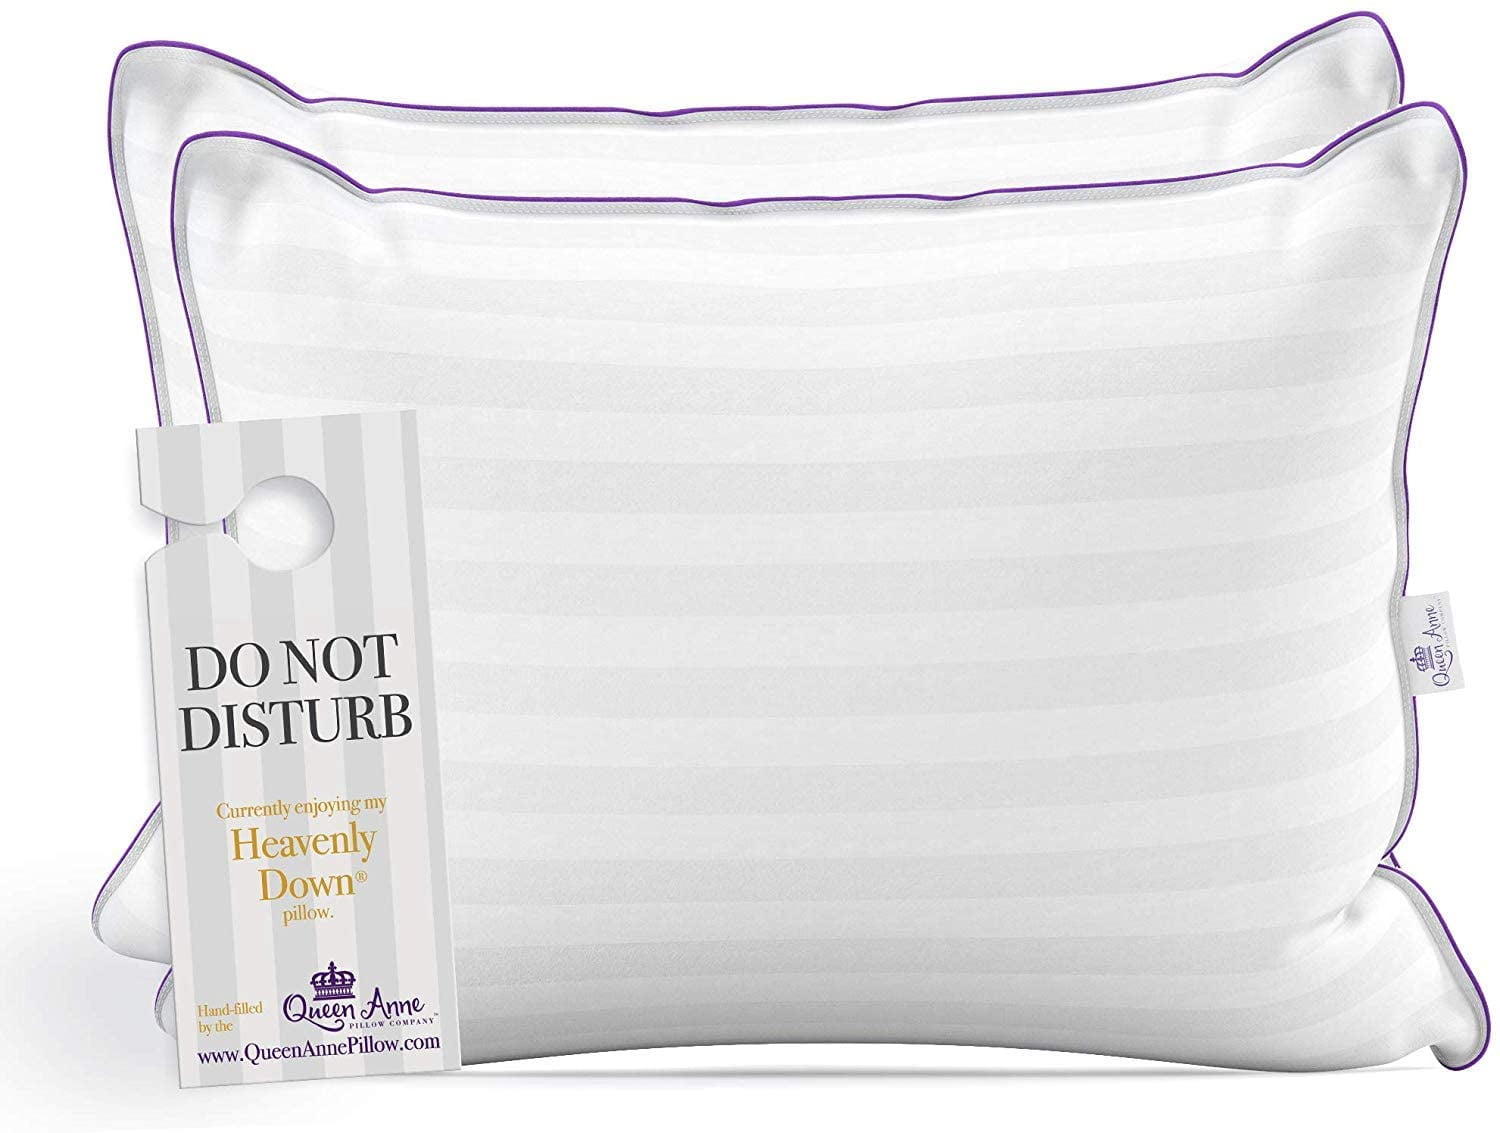 YesterdayHome Set of 2-18x18 Throw Pillow Inserts-Down Feather Pillow Inserts-White